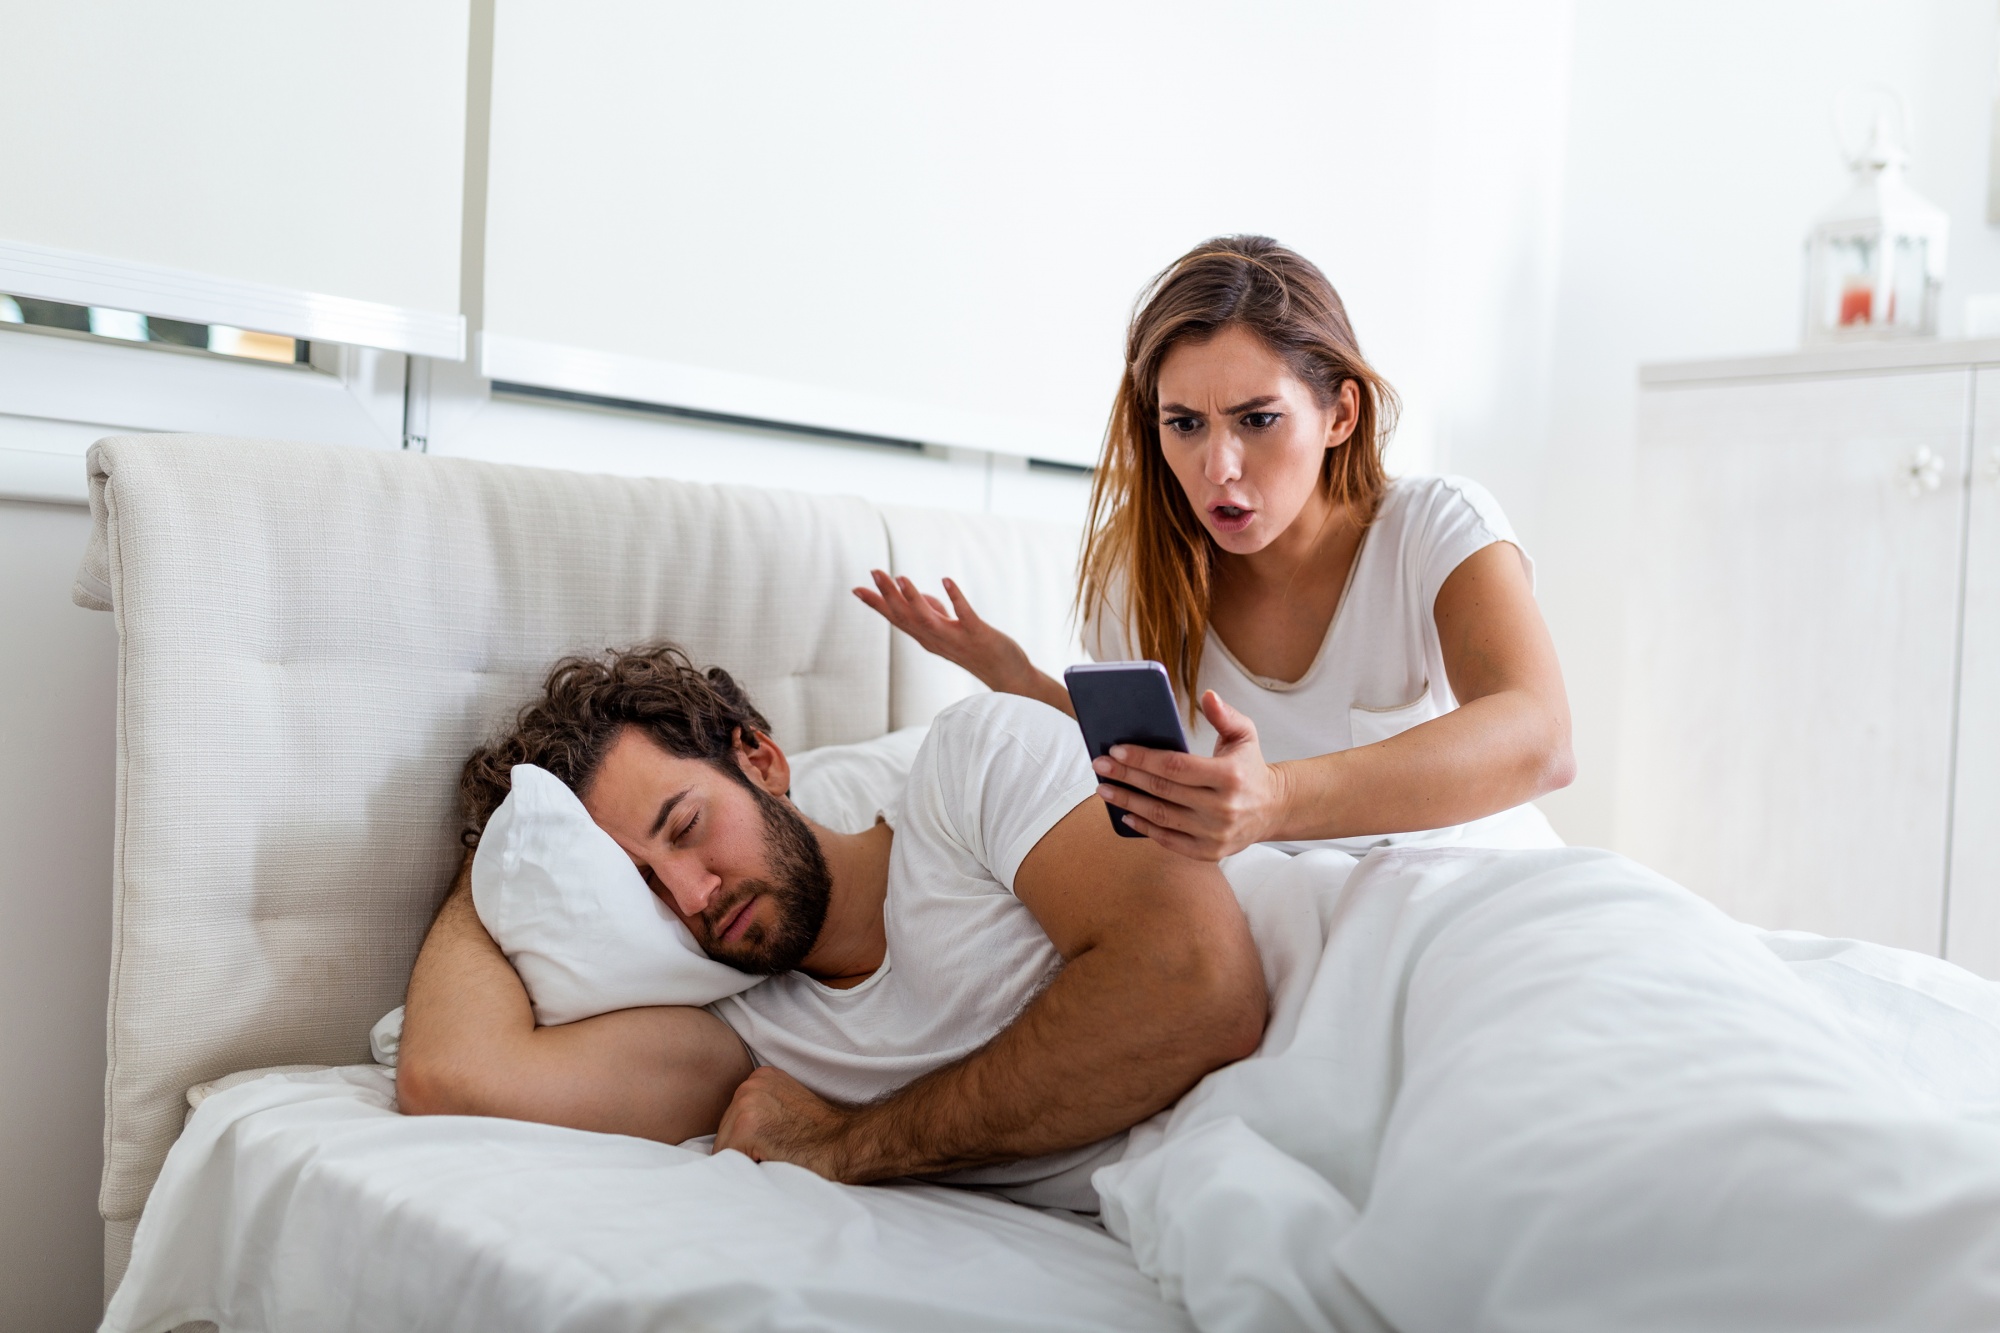 Toxic relationship habits, husband sleeping while his wife is checking text messages on his cell phone